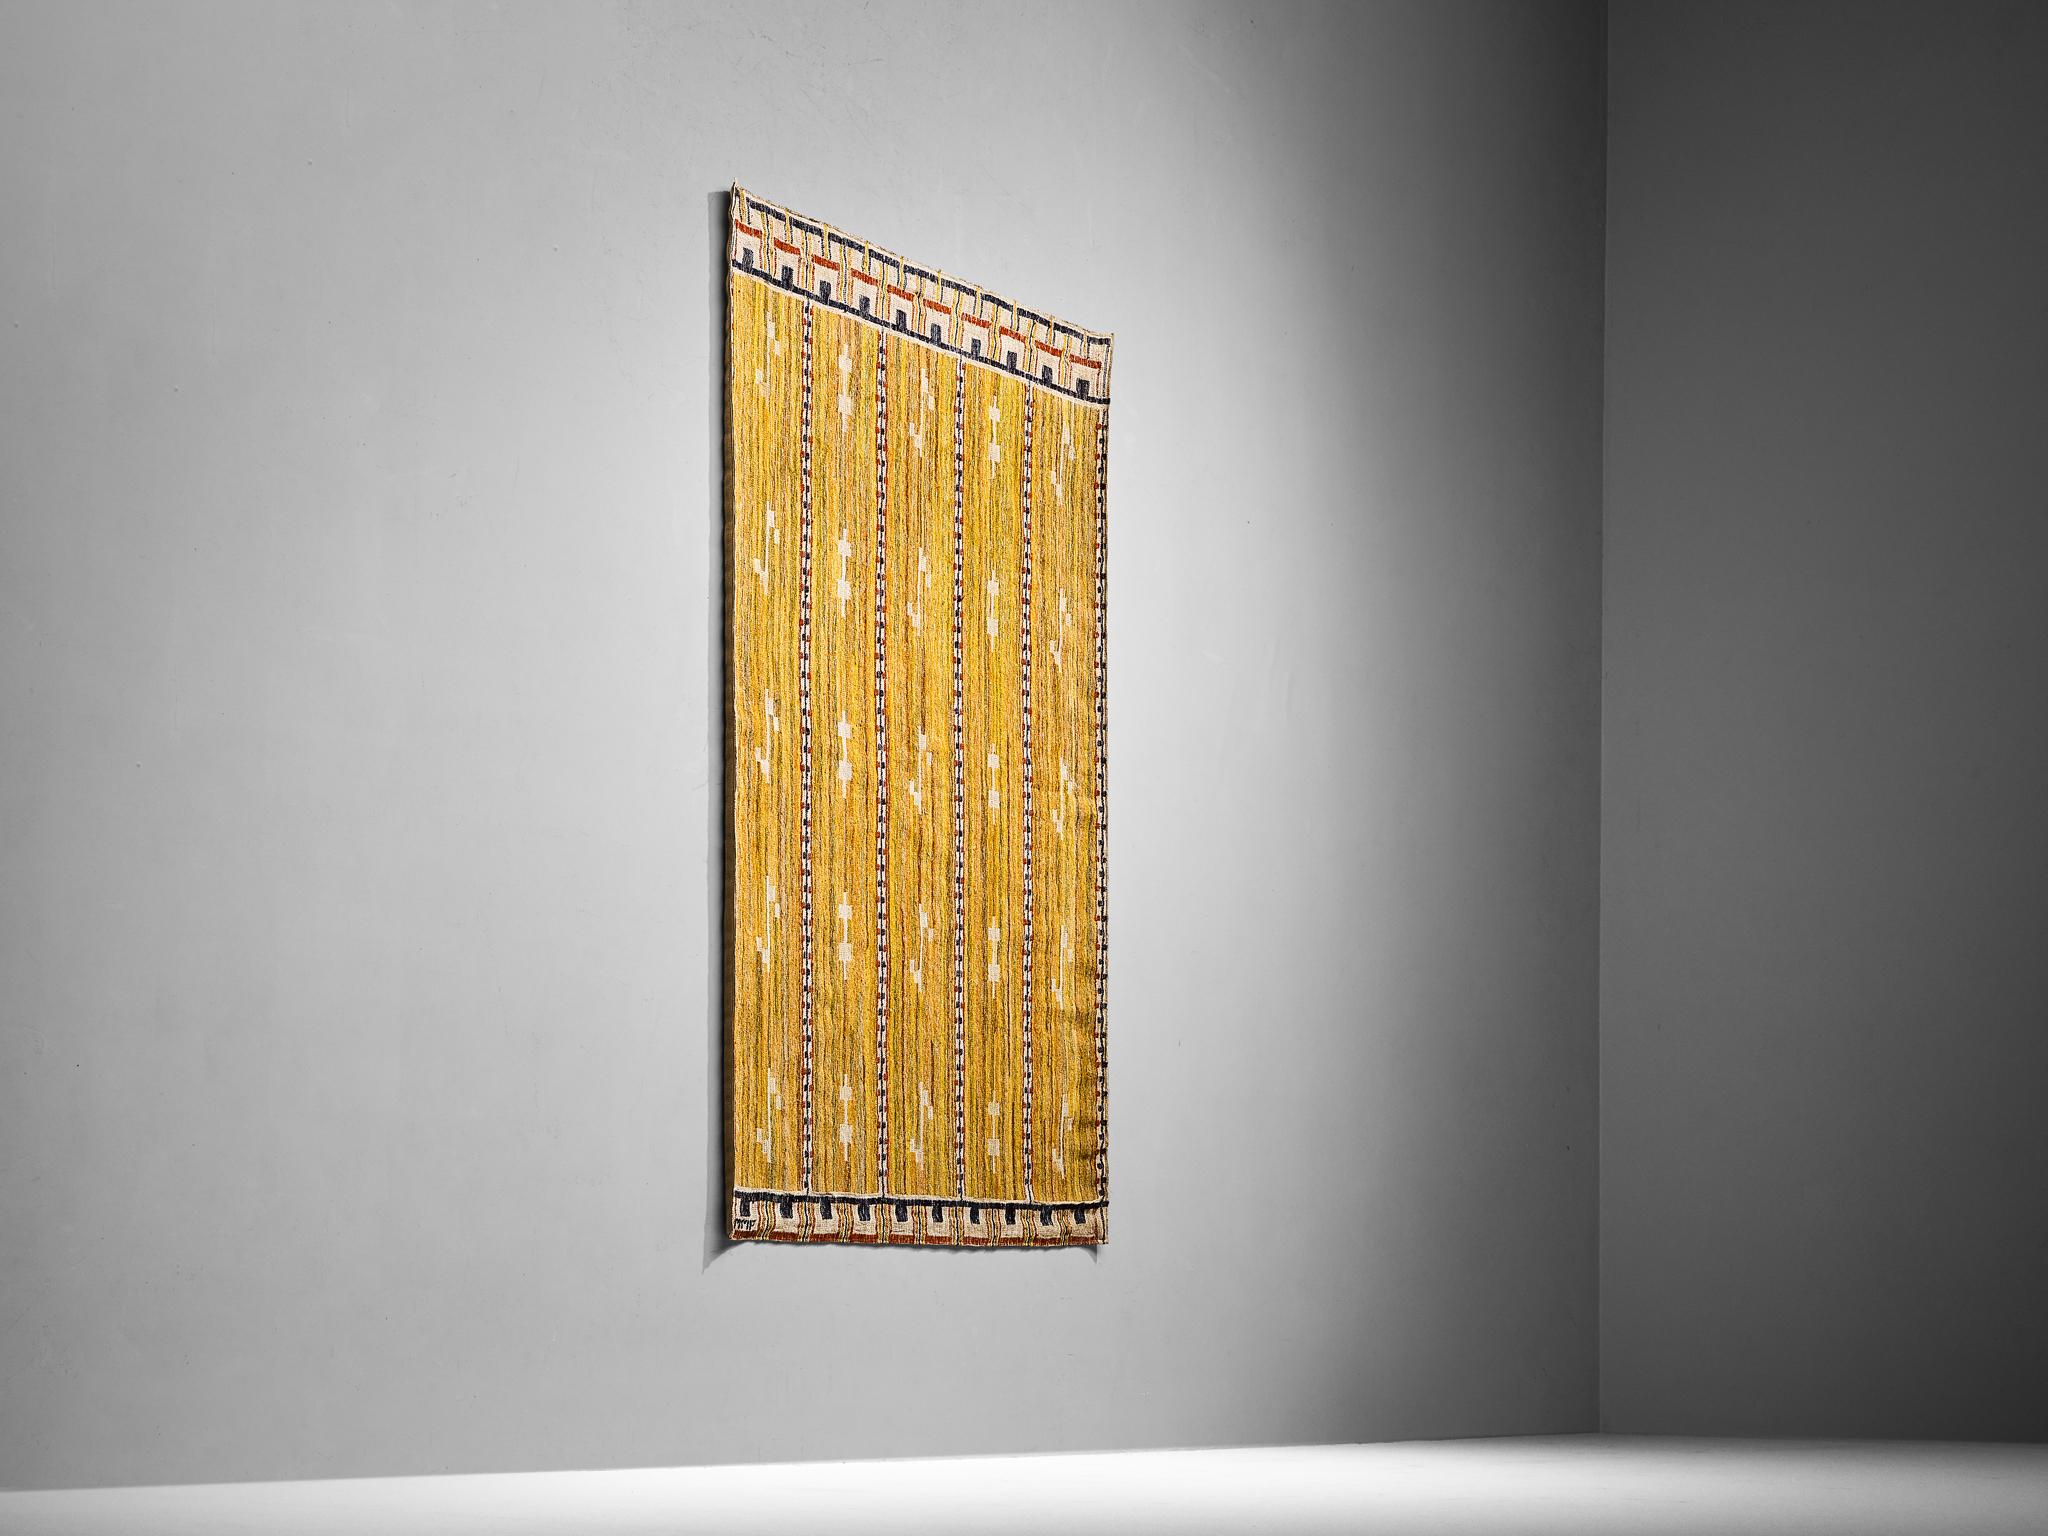 Märta Måås Fjetterström for MMF, ‘Gul våd’ wall tapestry, wool, linen, Sweden, design 1924, executed before 1942. 

This handwoven Gul våd’ tapestry is designed by one of the most influential and leading Swedish textile artists of the twentieth